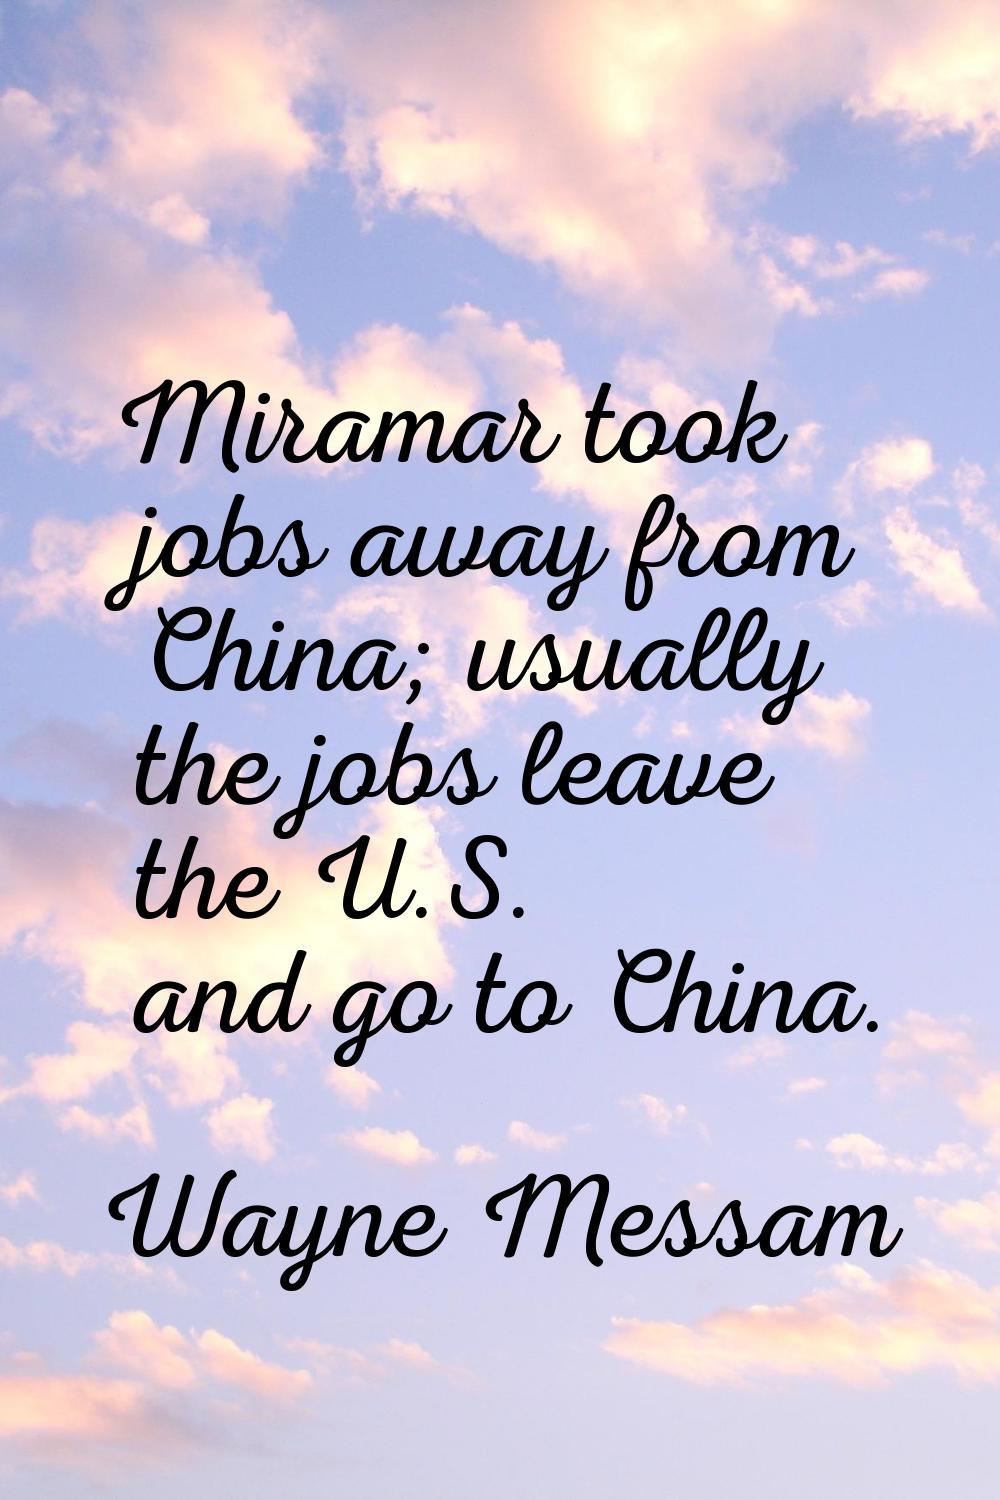 Miramar took jobs away from China; usually the jobs leave the U.S. and go to China.